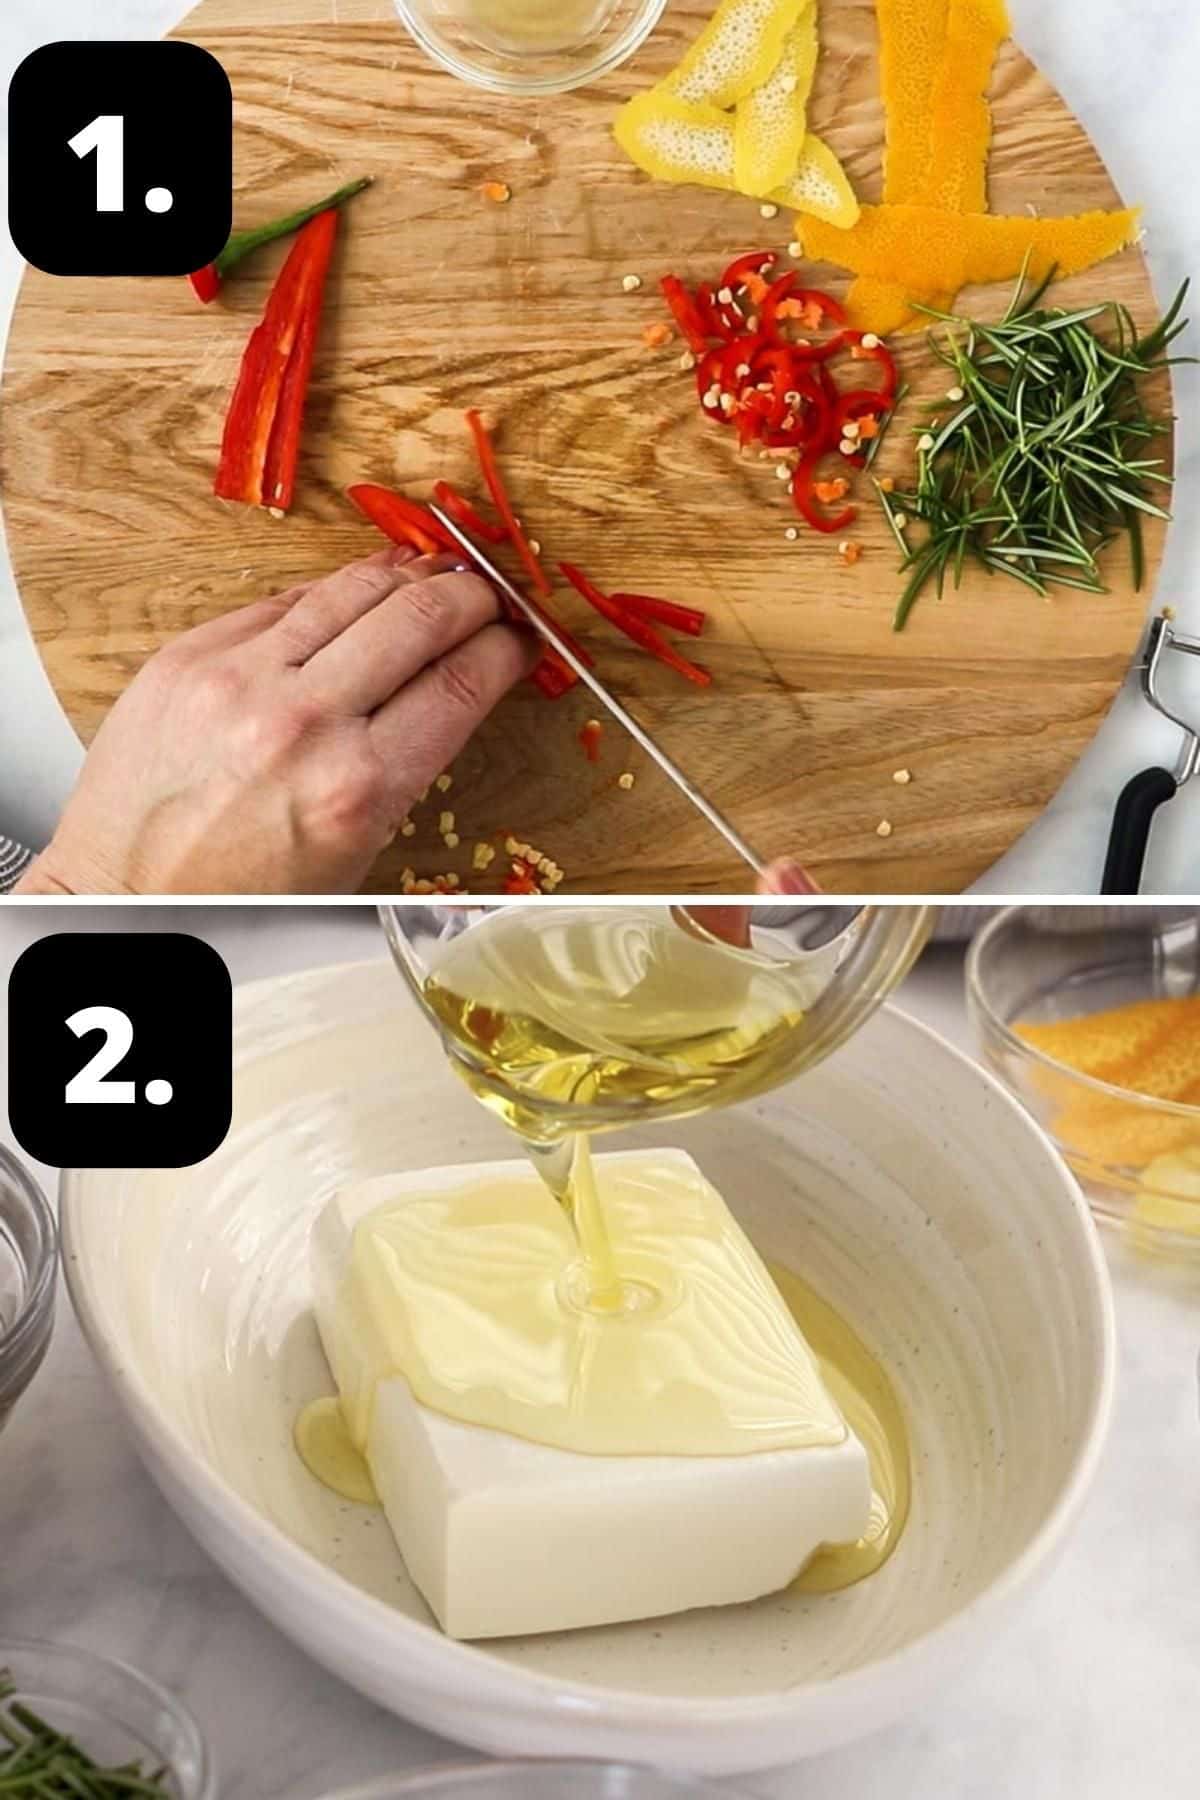 Steps 1-2 of preparing this recipe - the chilli, rosemary and citrus and feta in an oval dish with olive oil being poured over.